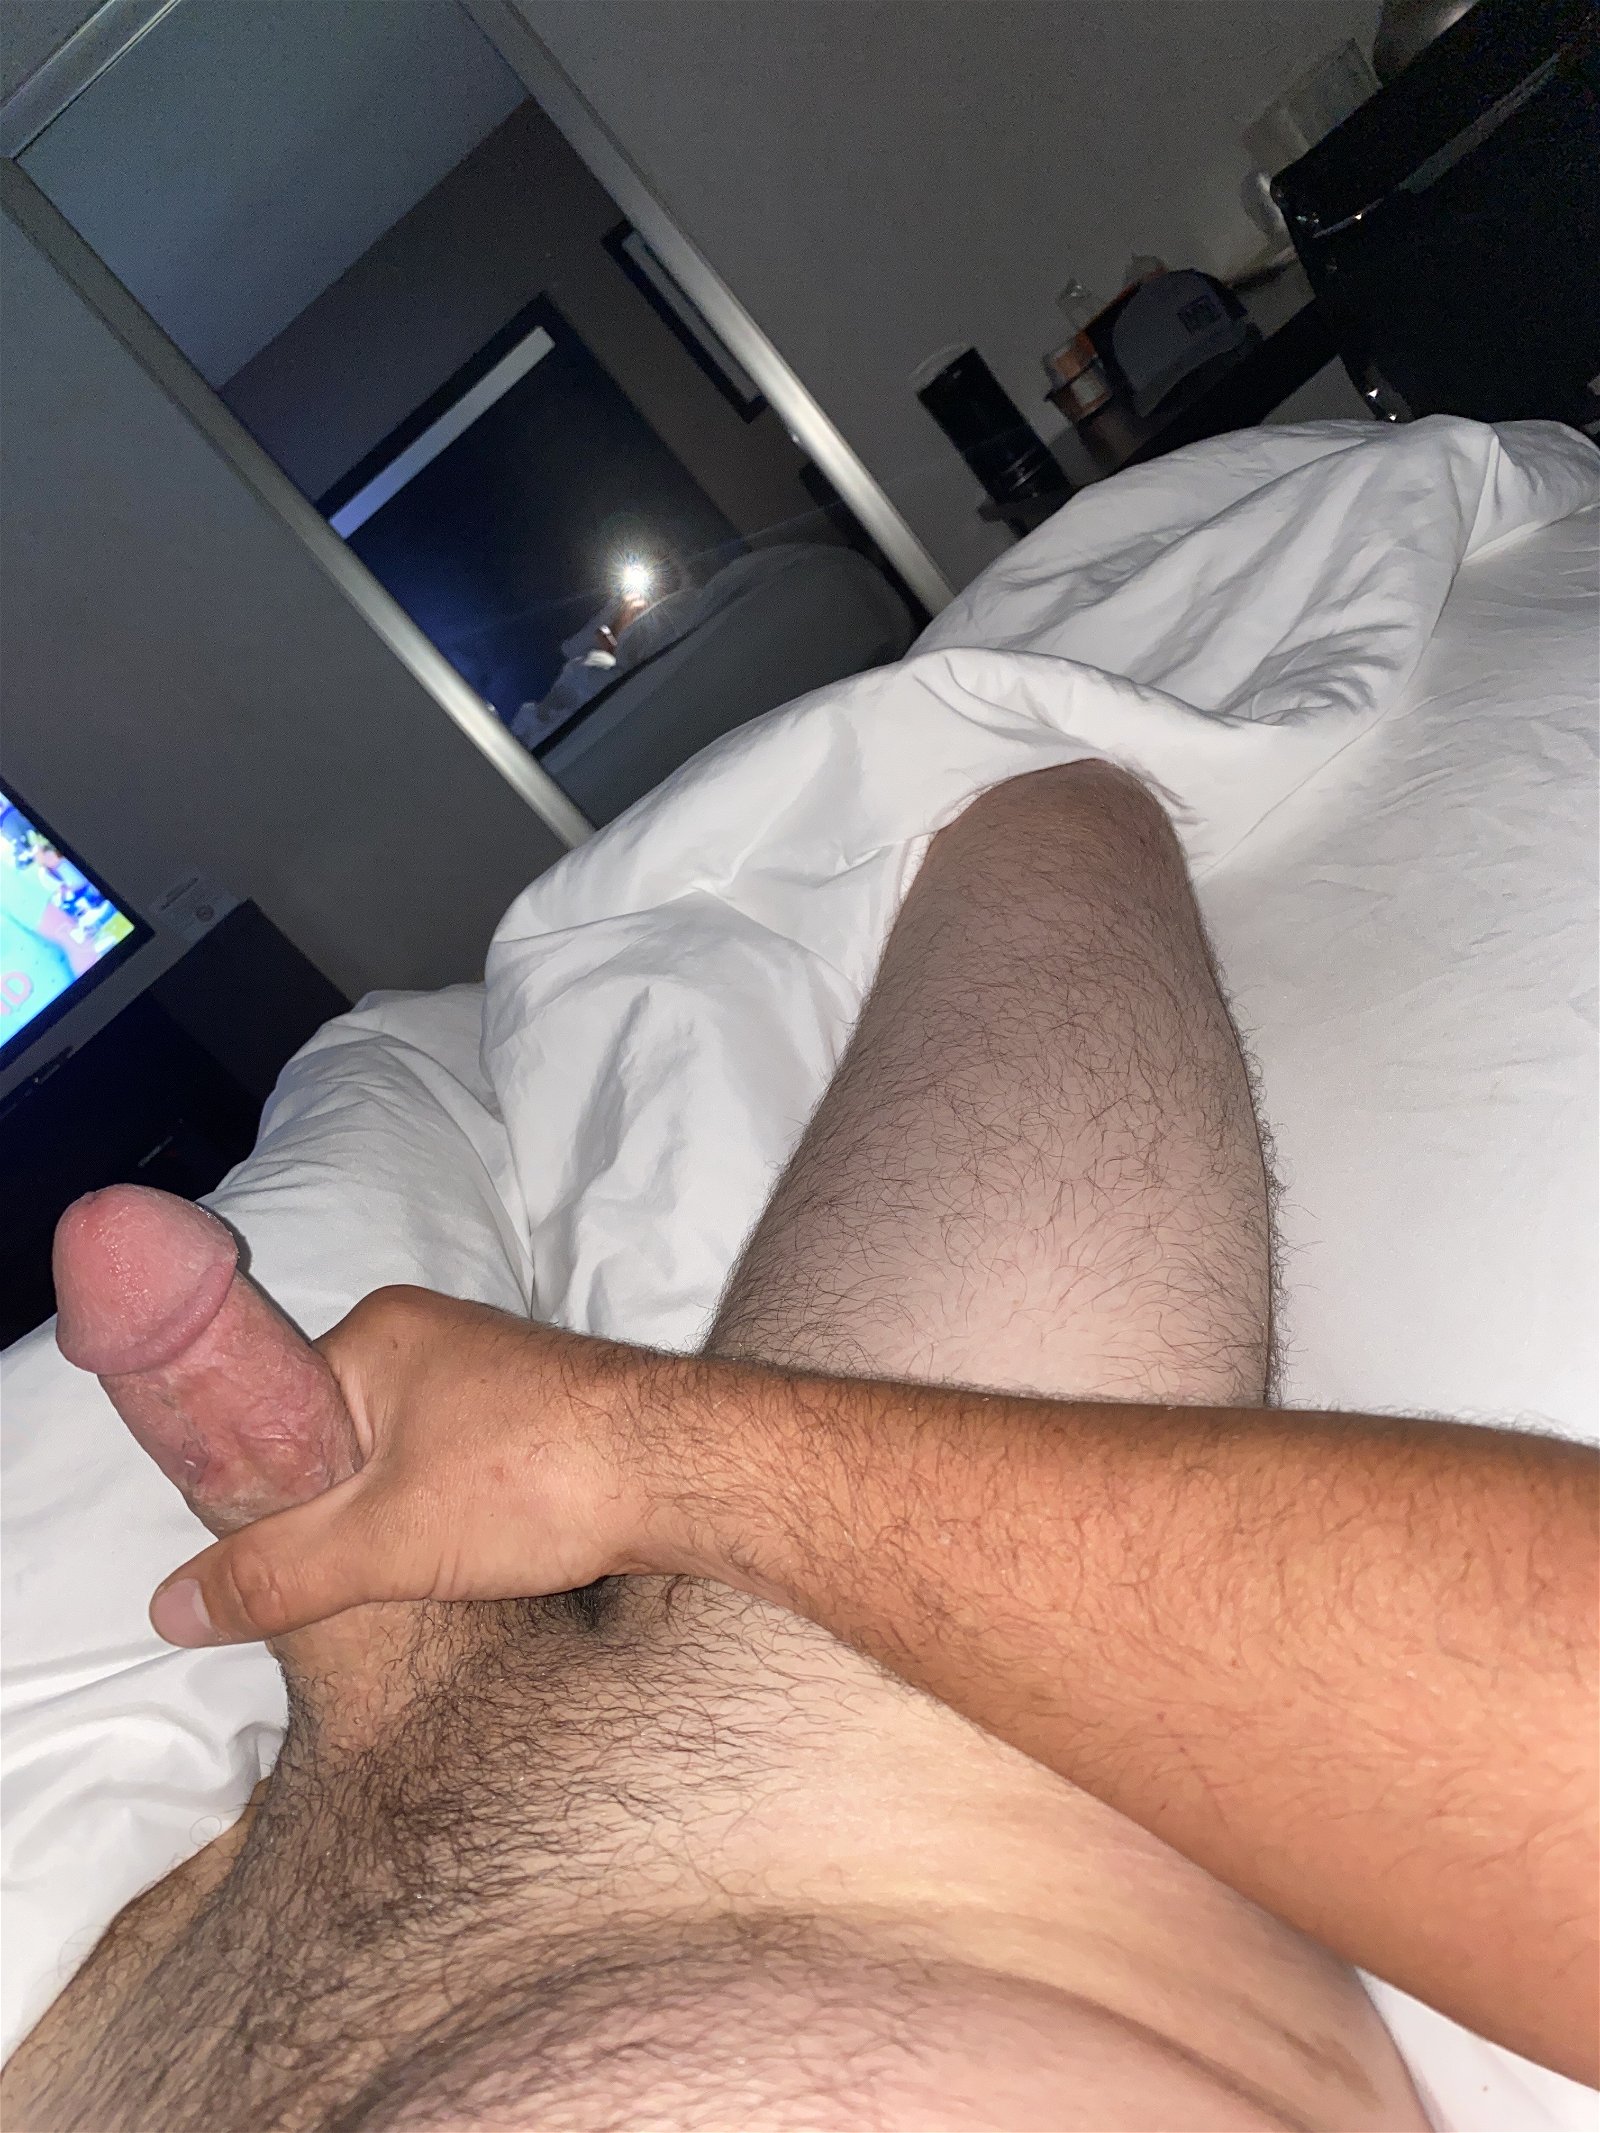 Photo by Mnguy24 with the username @Mnguy24,  September 6, 2020 at 10:02 AM. The post is about the topic Gay and the text says 'tired but cant sleep! cant wait to find time to play with my secret friend'